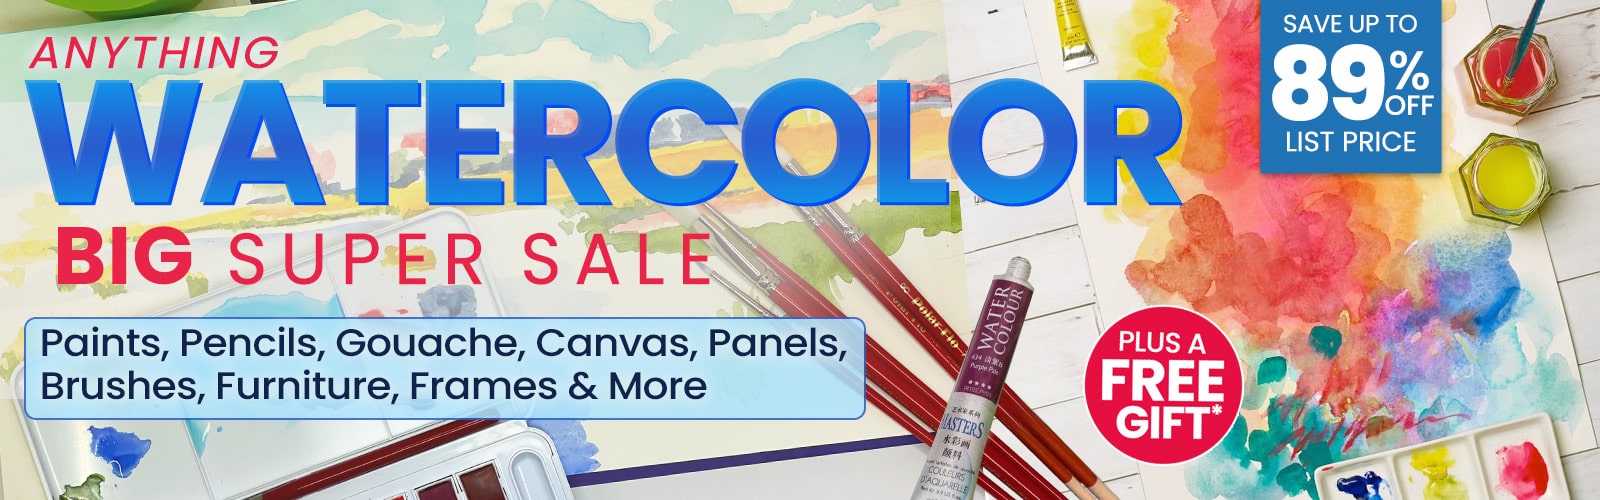 Anything Watercolor Super Sale